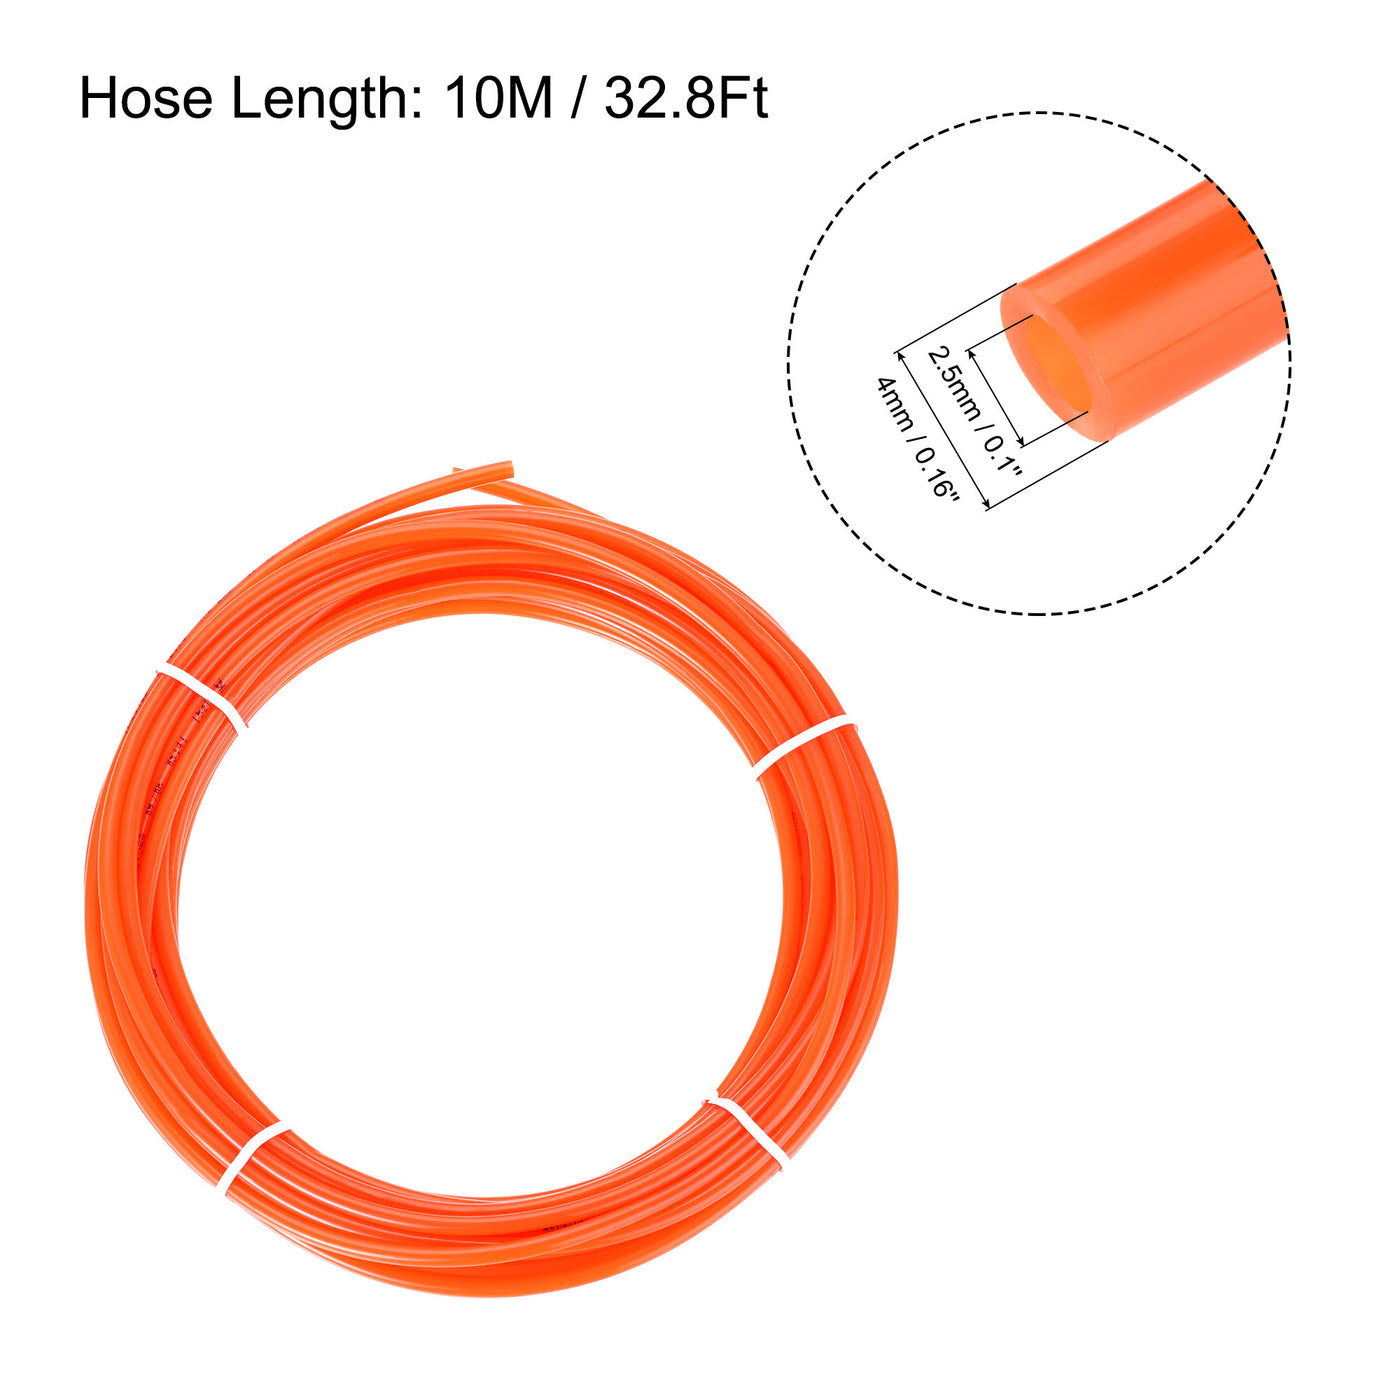 Uxcell Uxcell Pneumatic 4mm OD Polyurethane PU Air Hose Tubing Kit 10 Meters Clear with 14 Pcs Push to Connect Fittings